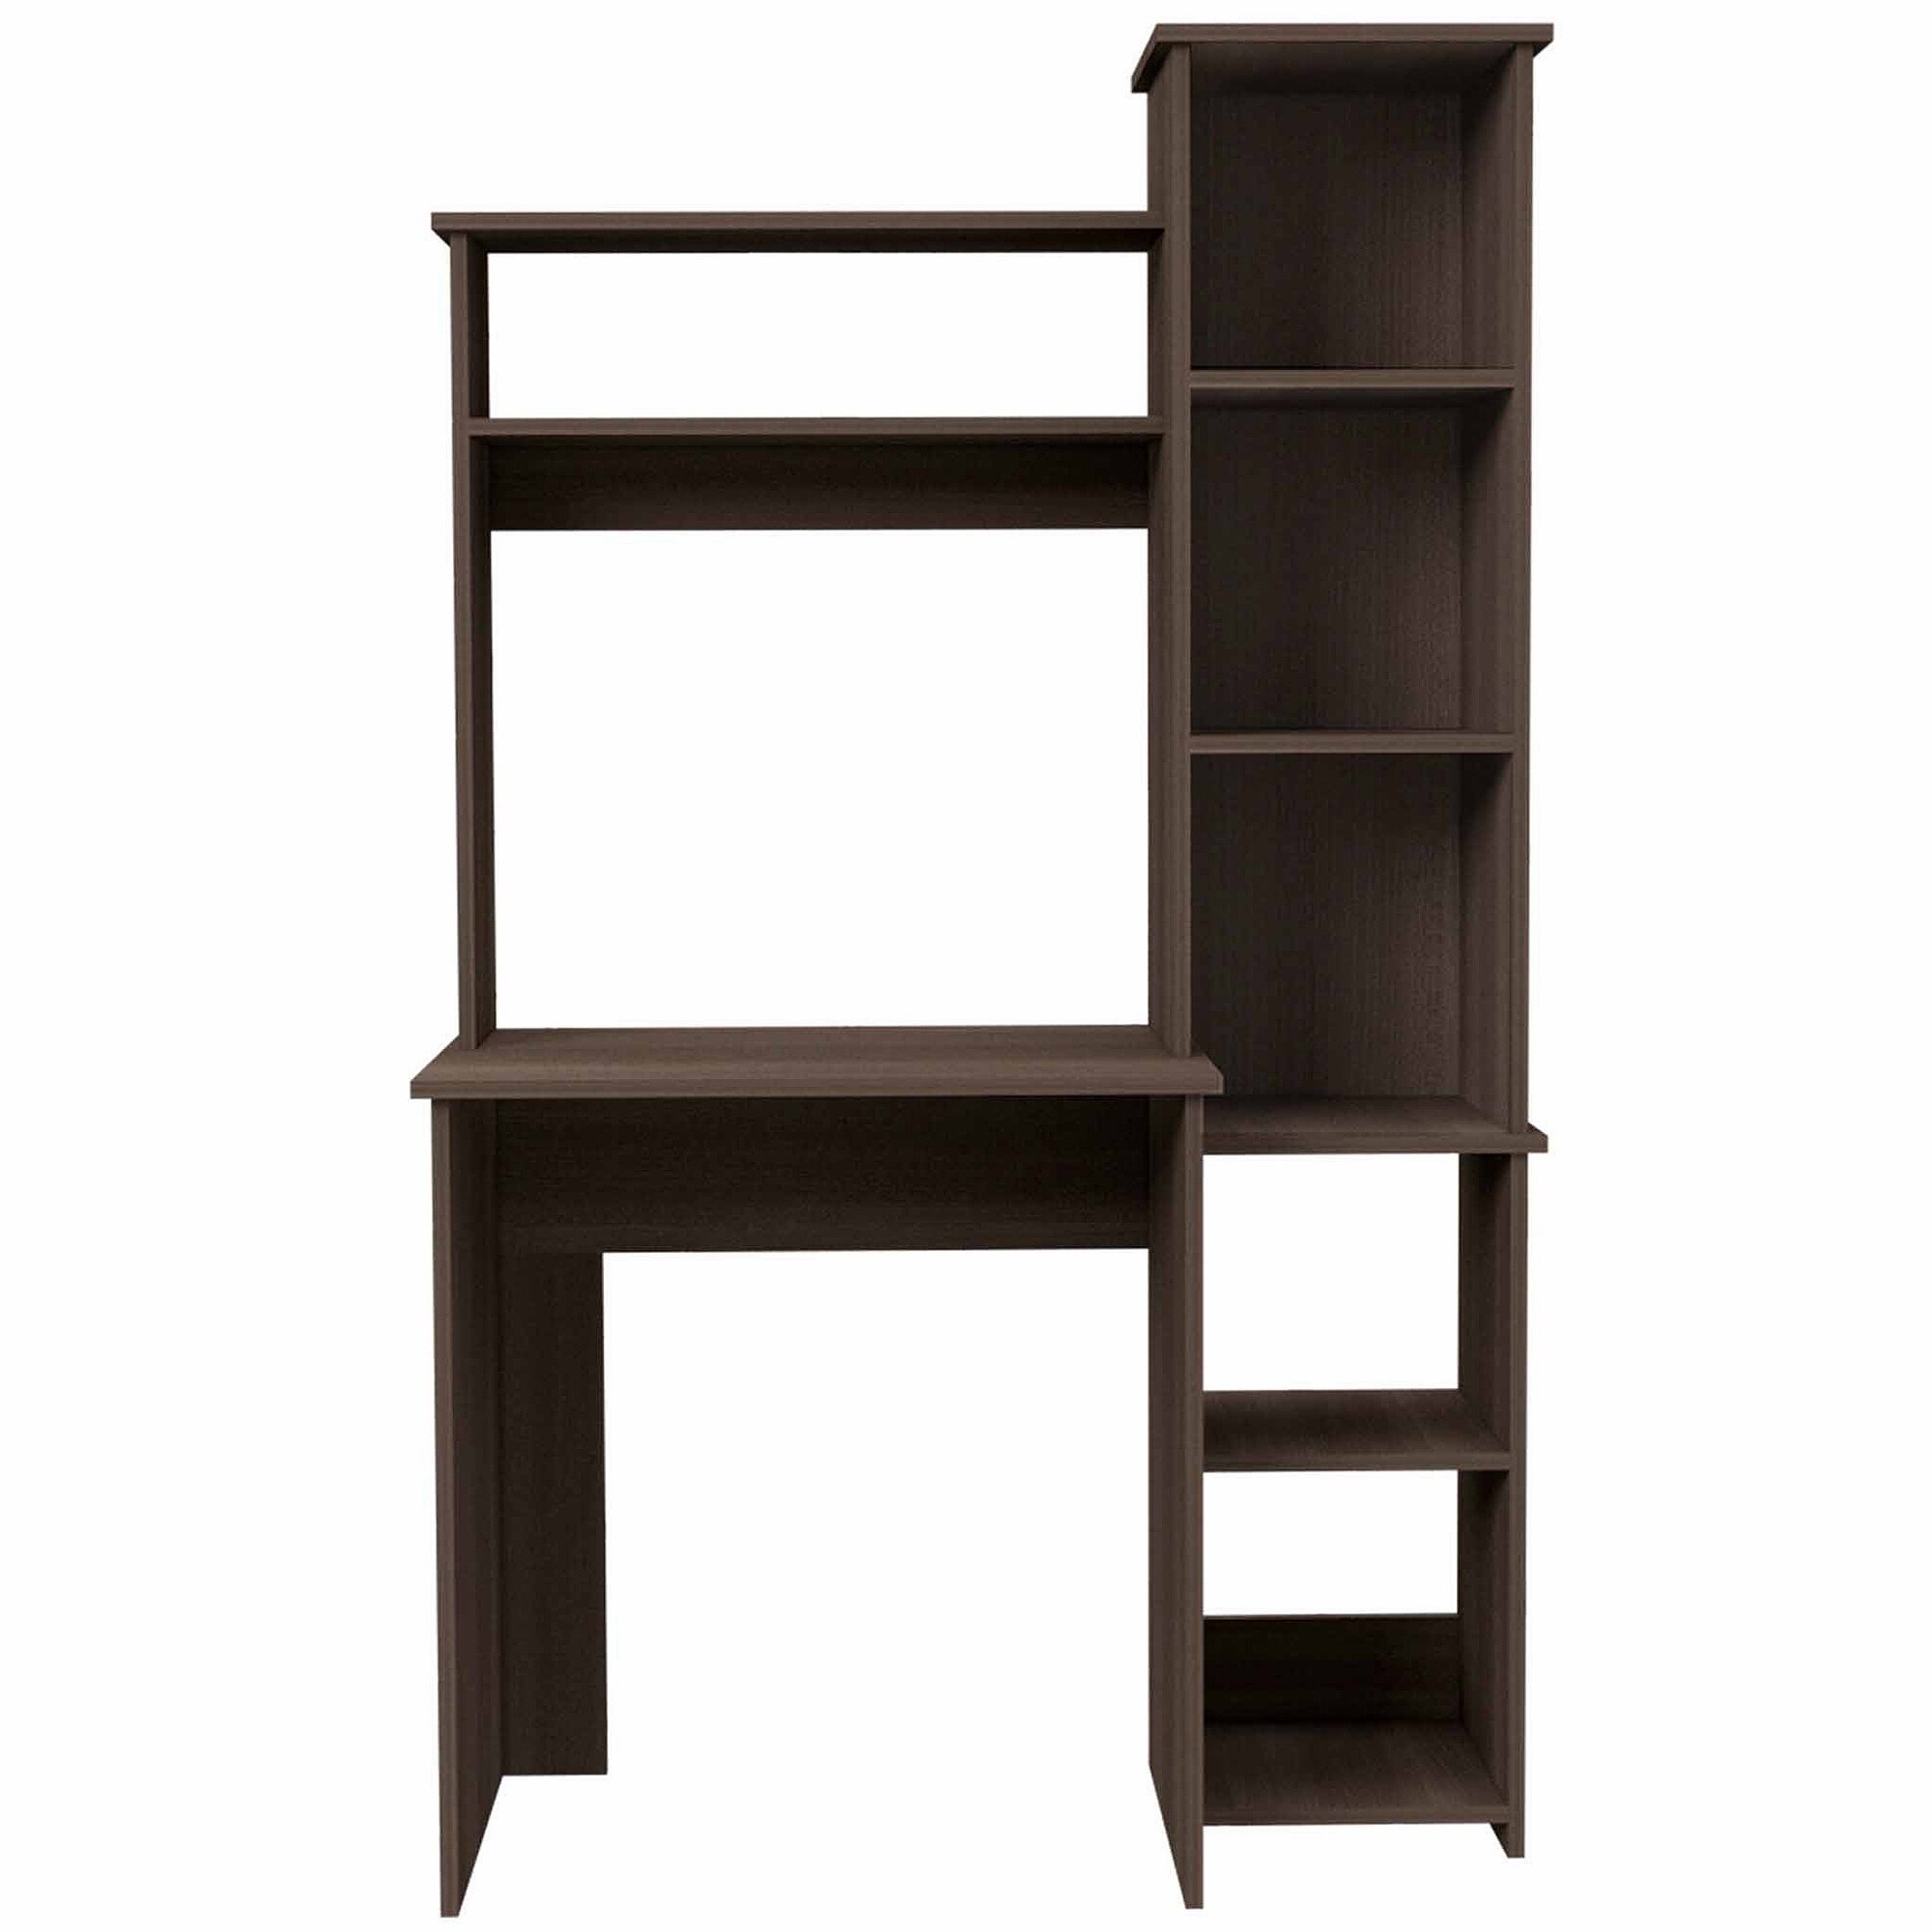 6-Shelf Writing Desk with Built-in Bookcase